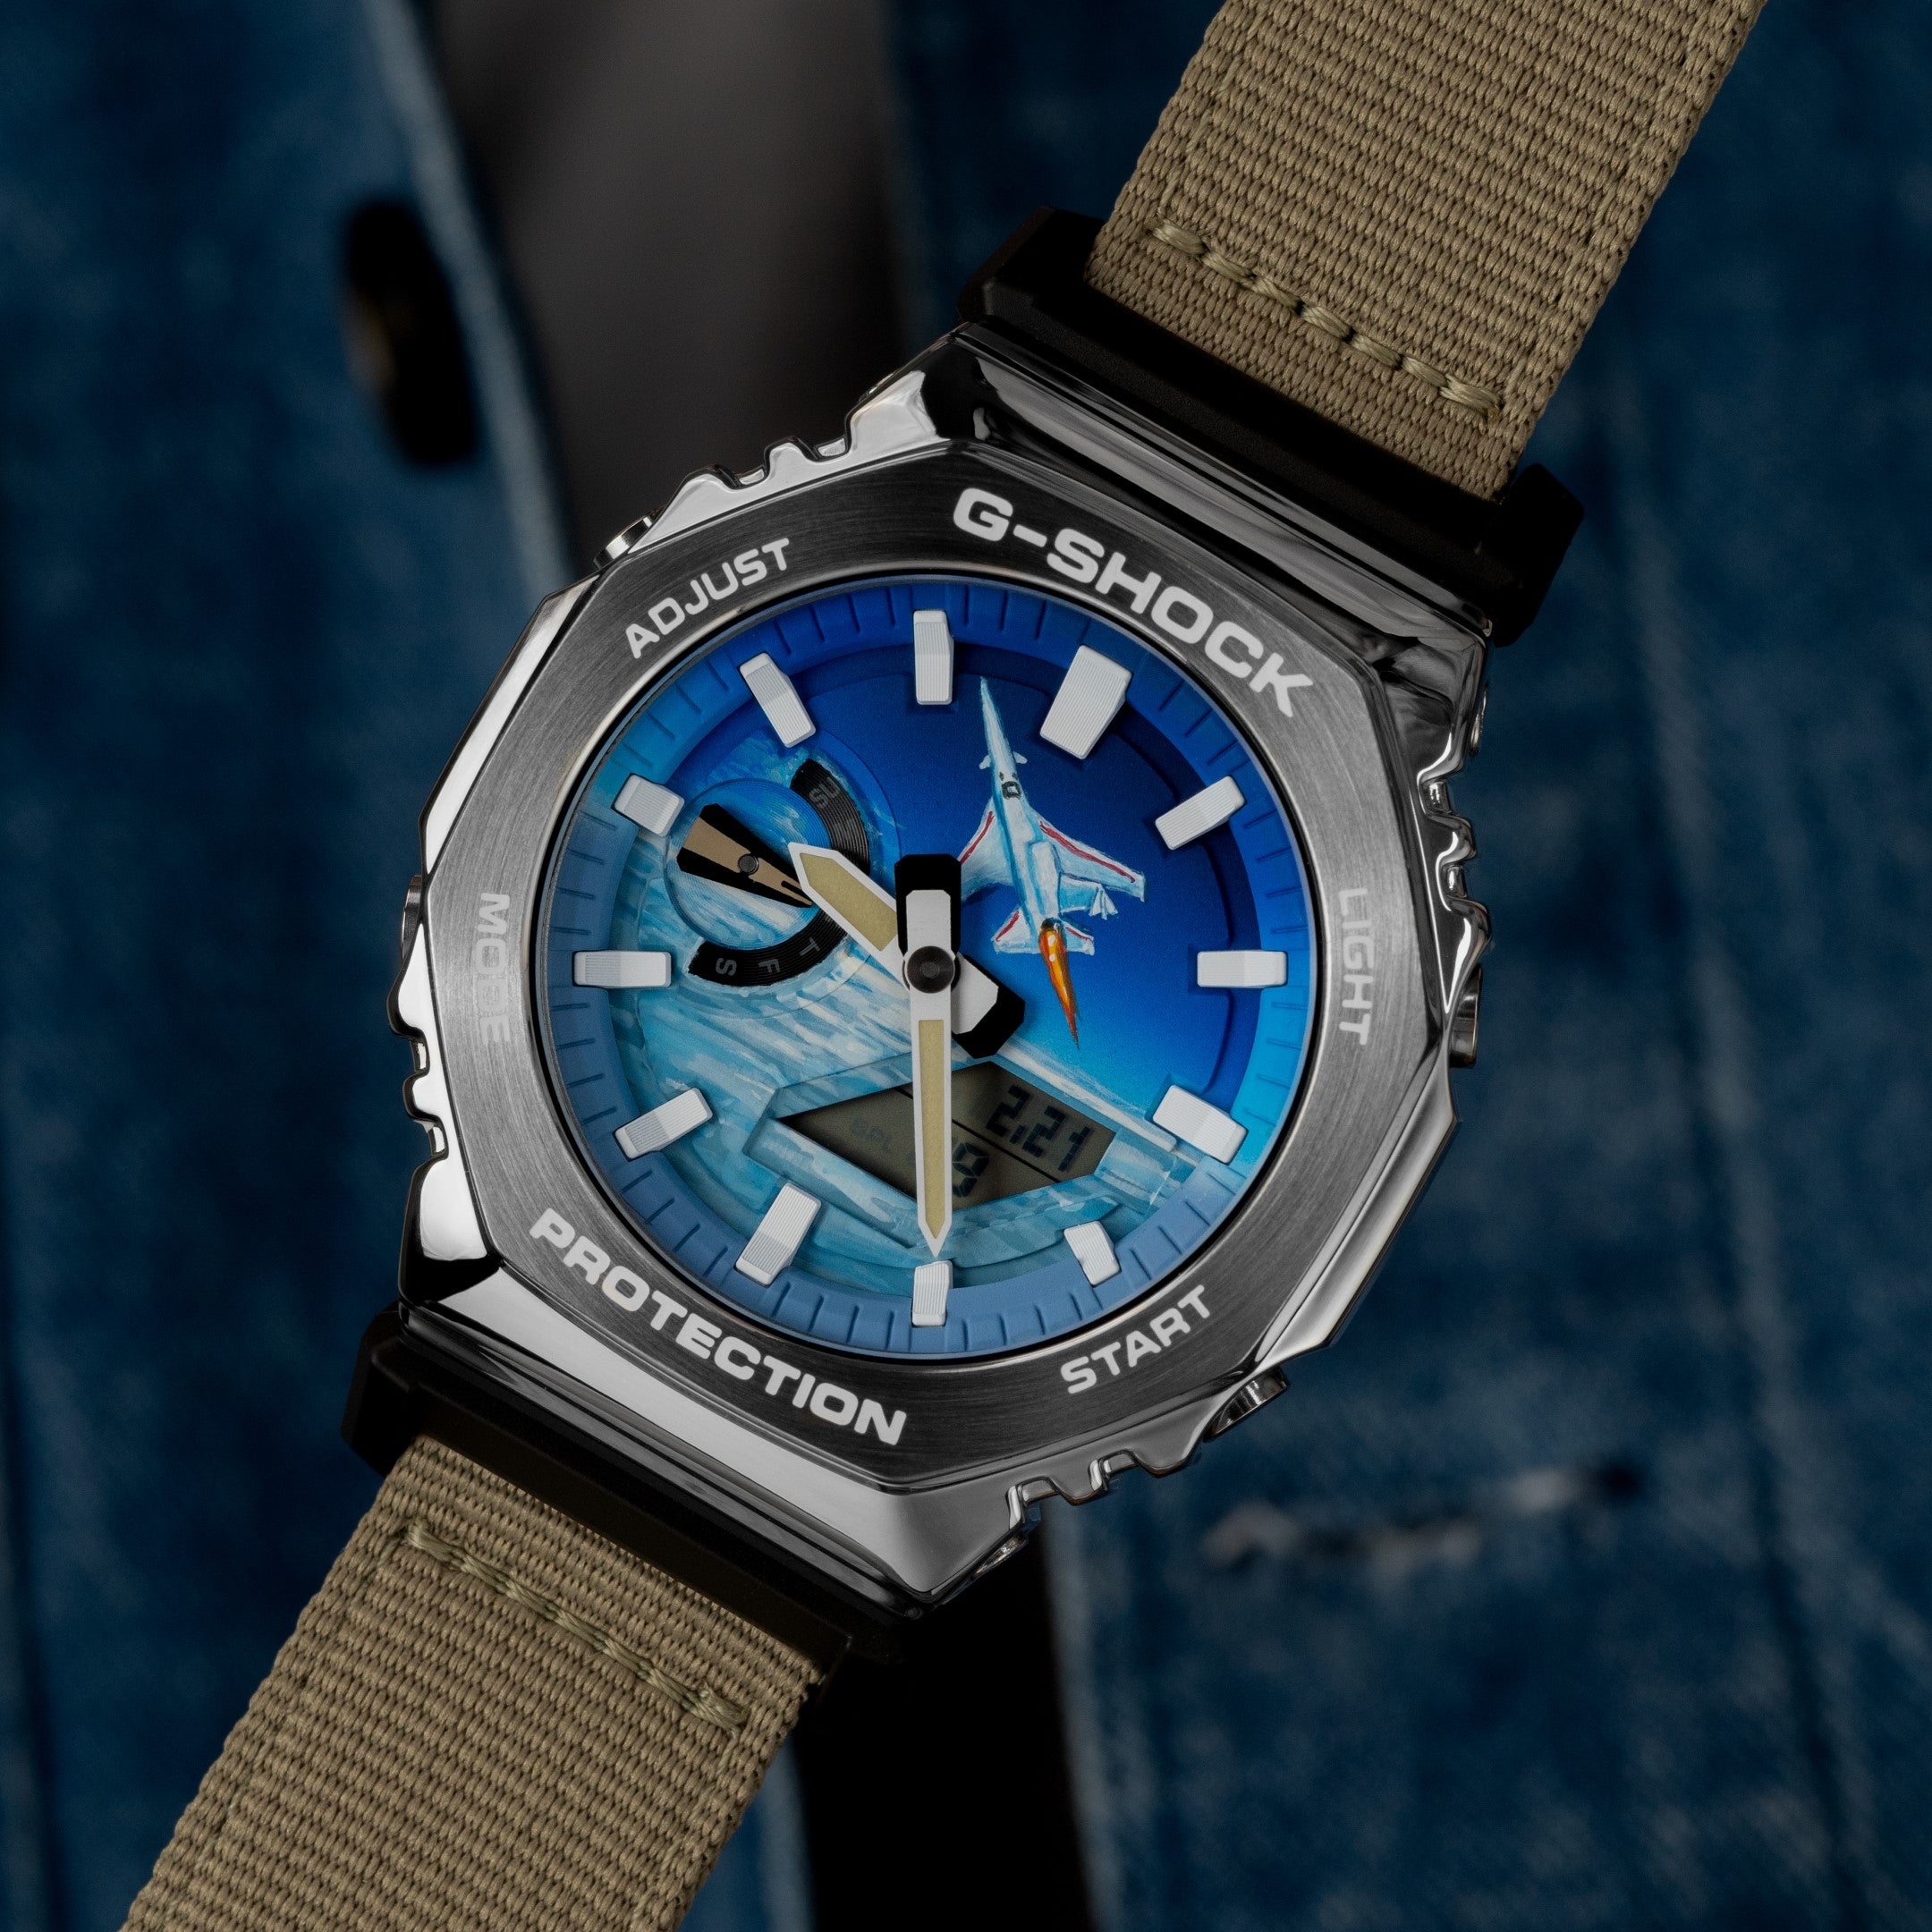 Innovative G-Shock Supersonic watch, a homage to the X-59 aircraft's sleek design